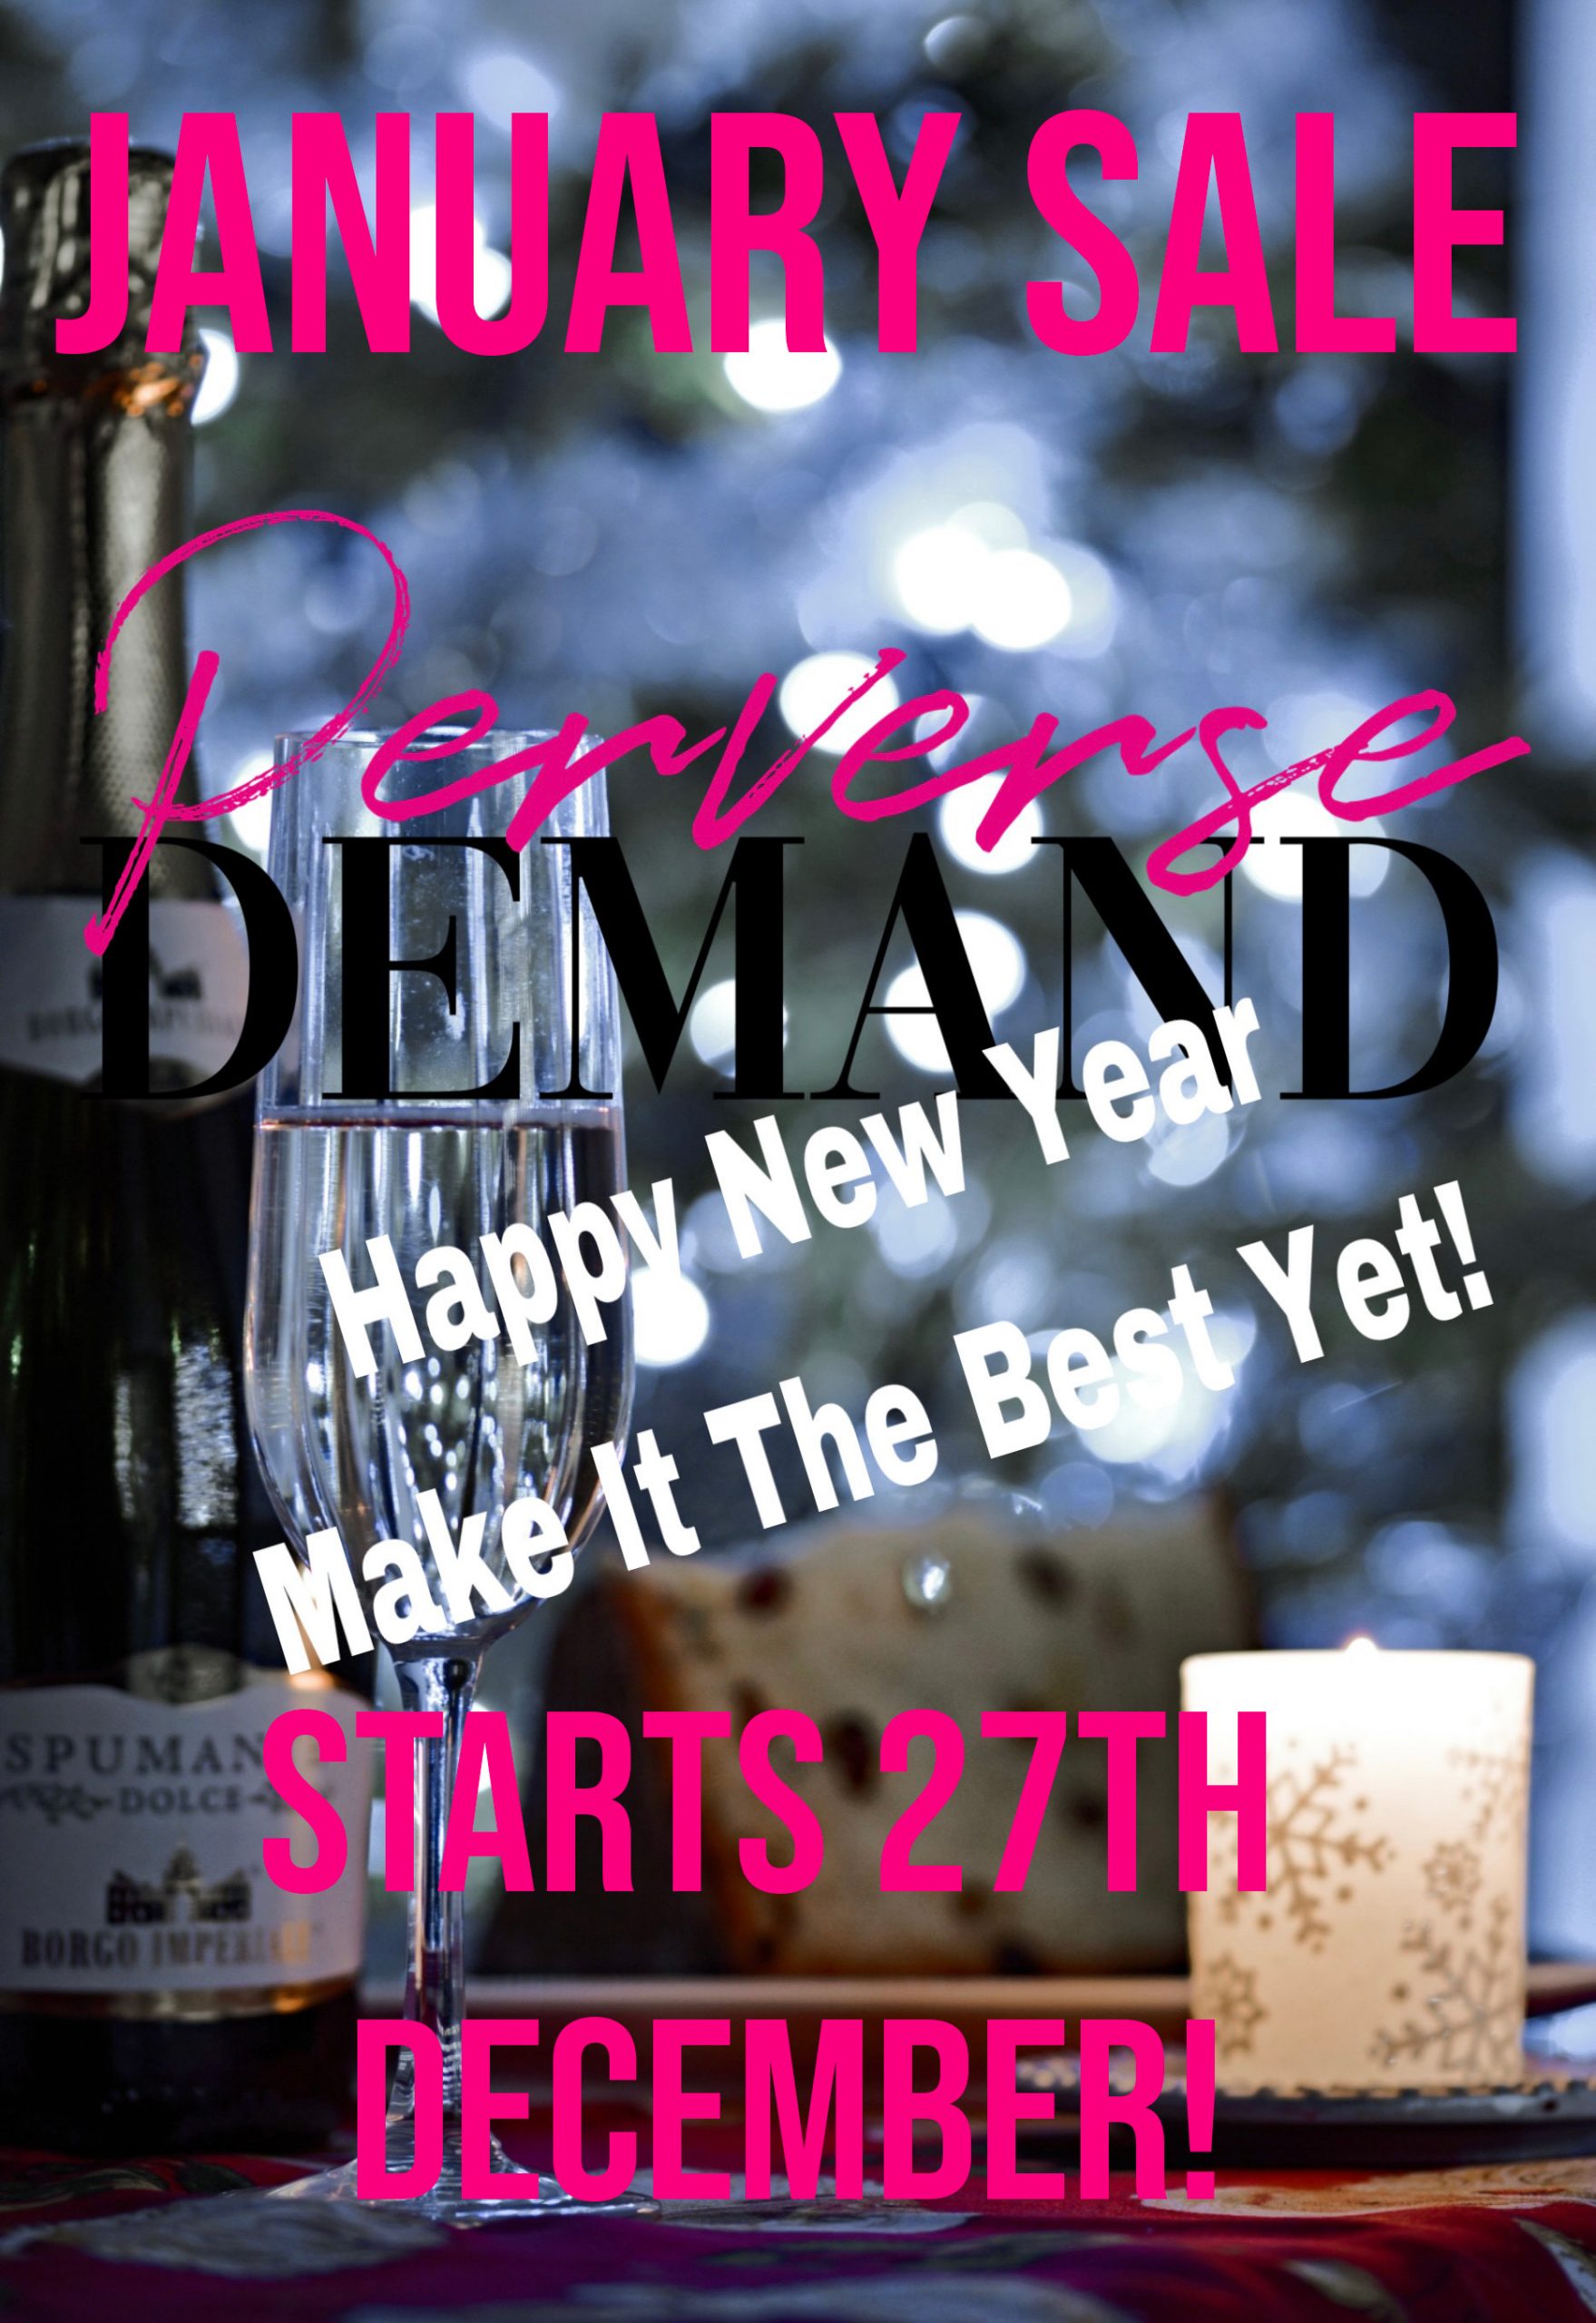 Perverse Demand's January Sale starts 27th December 2023, with new lines added daily for the first 7 days